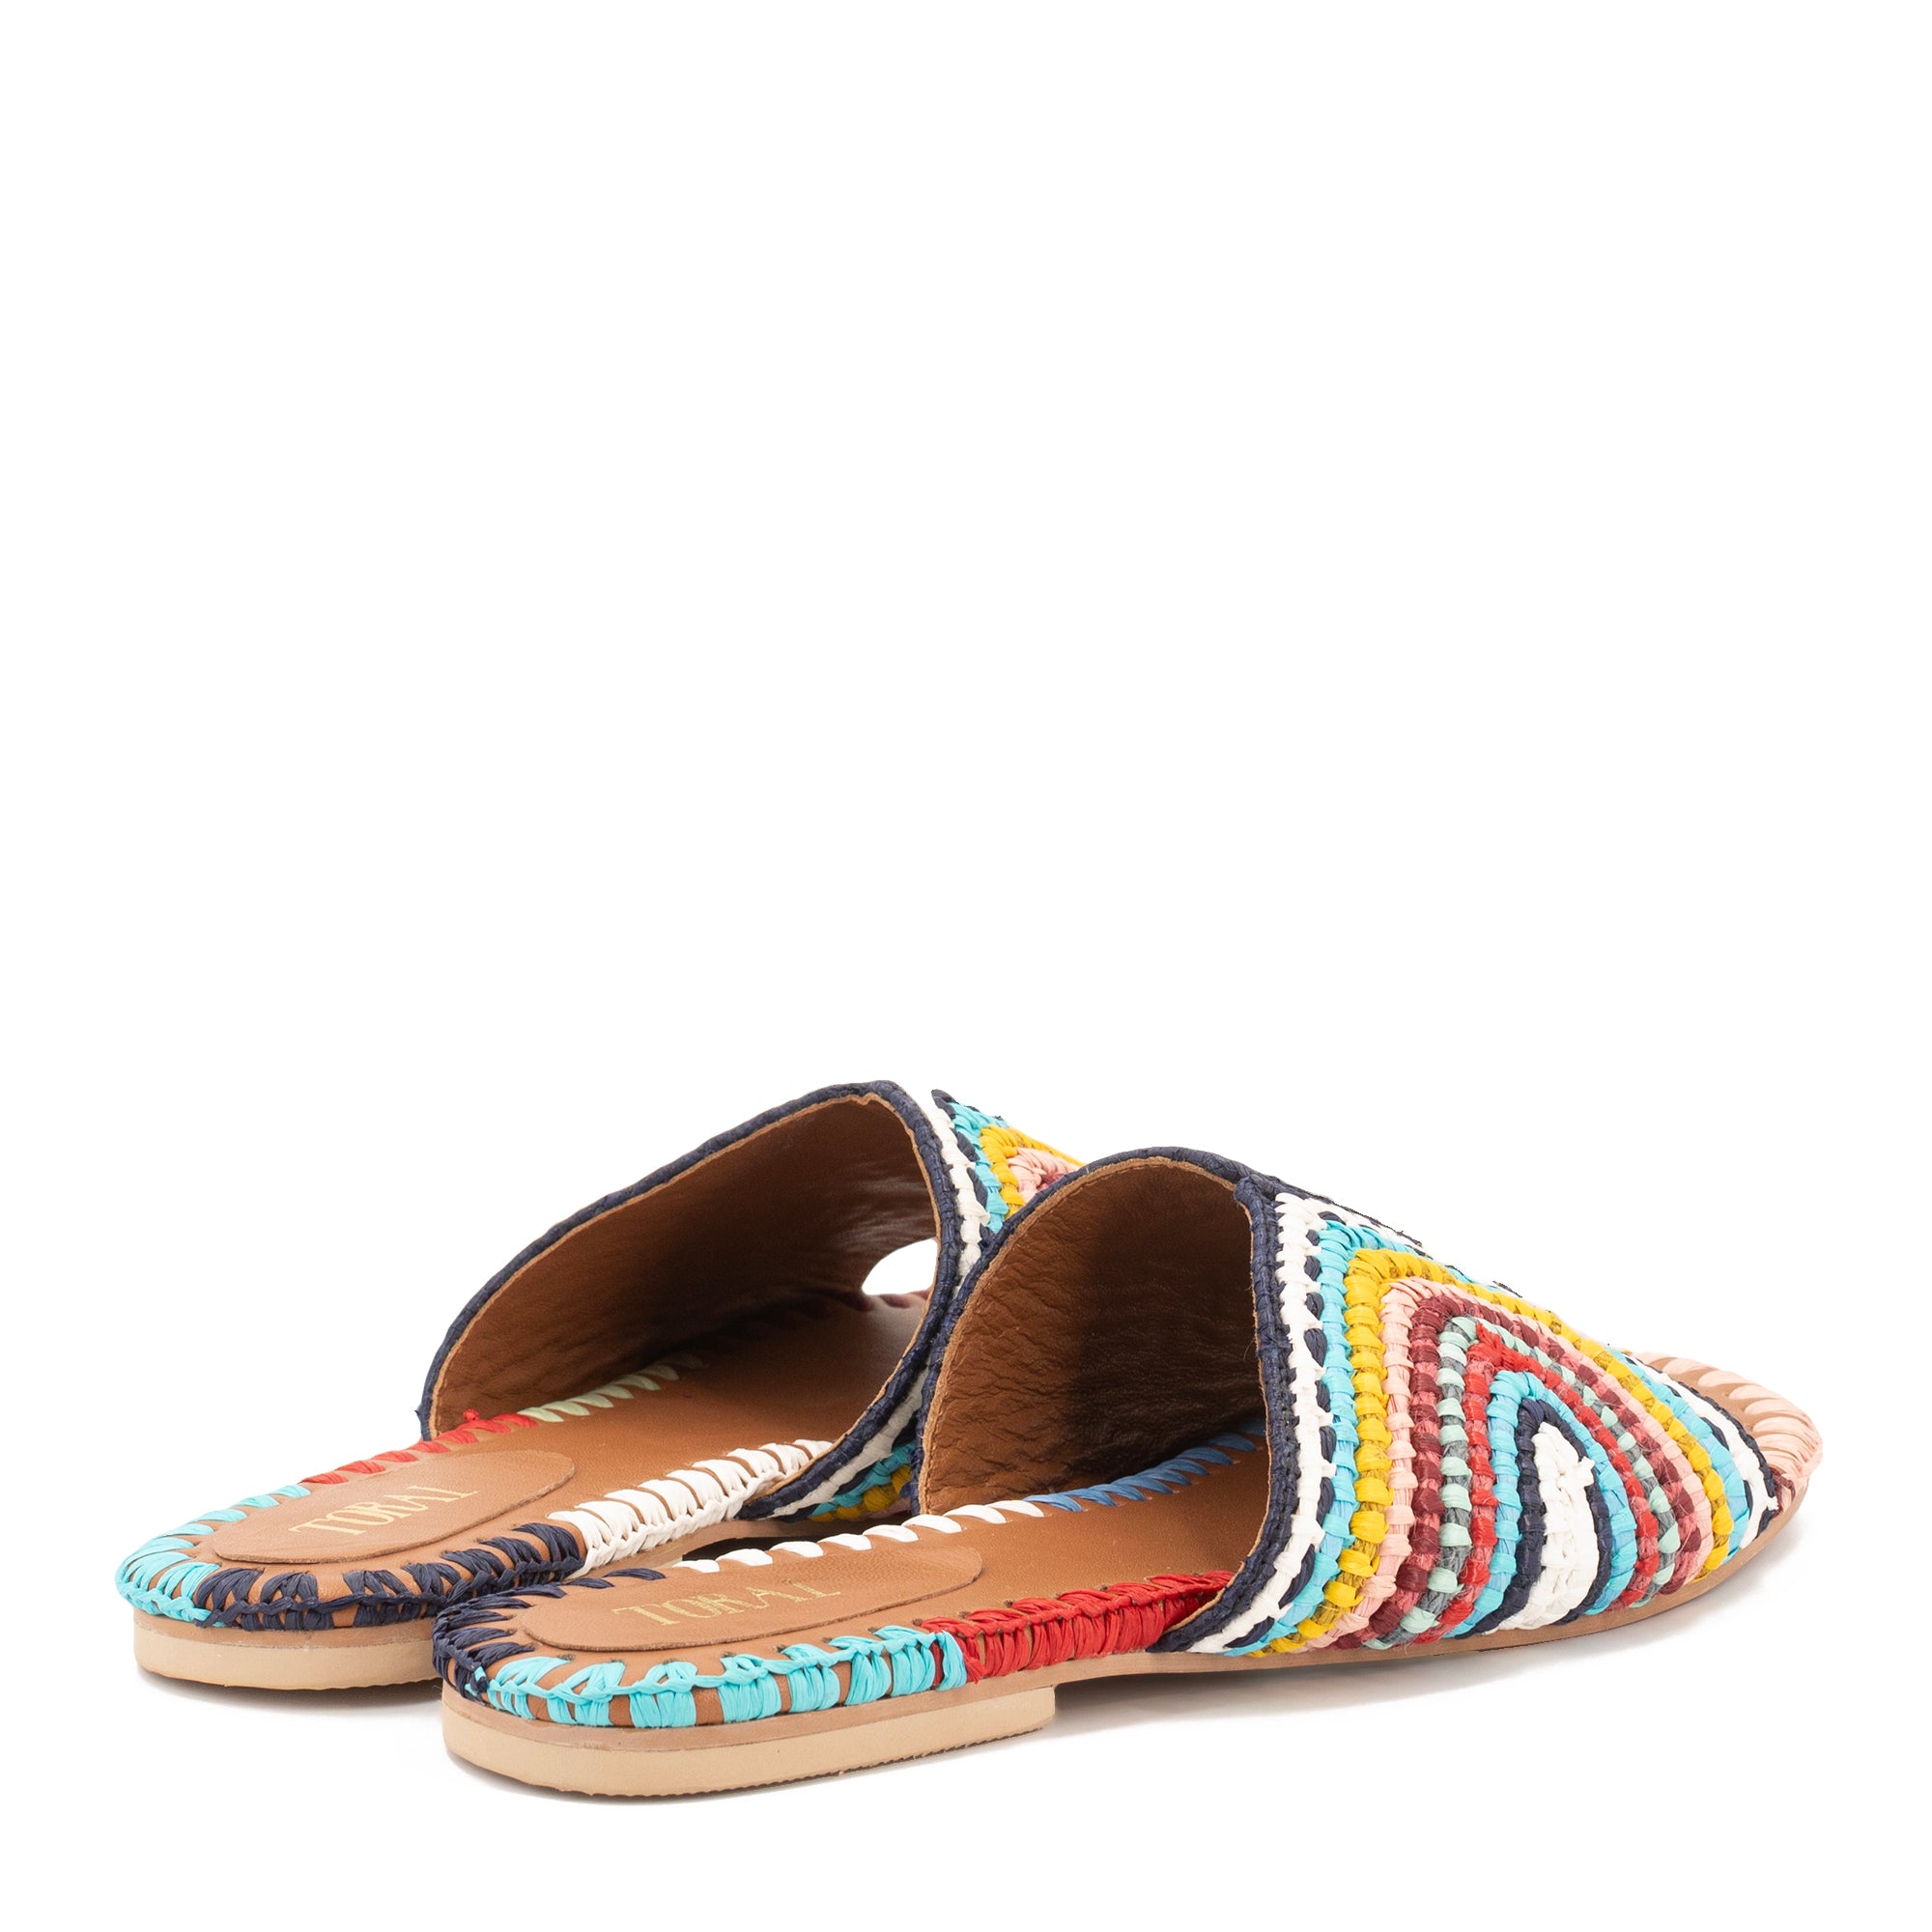 BETTY MULICOLORED SANDALS